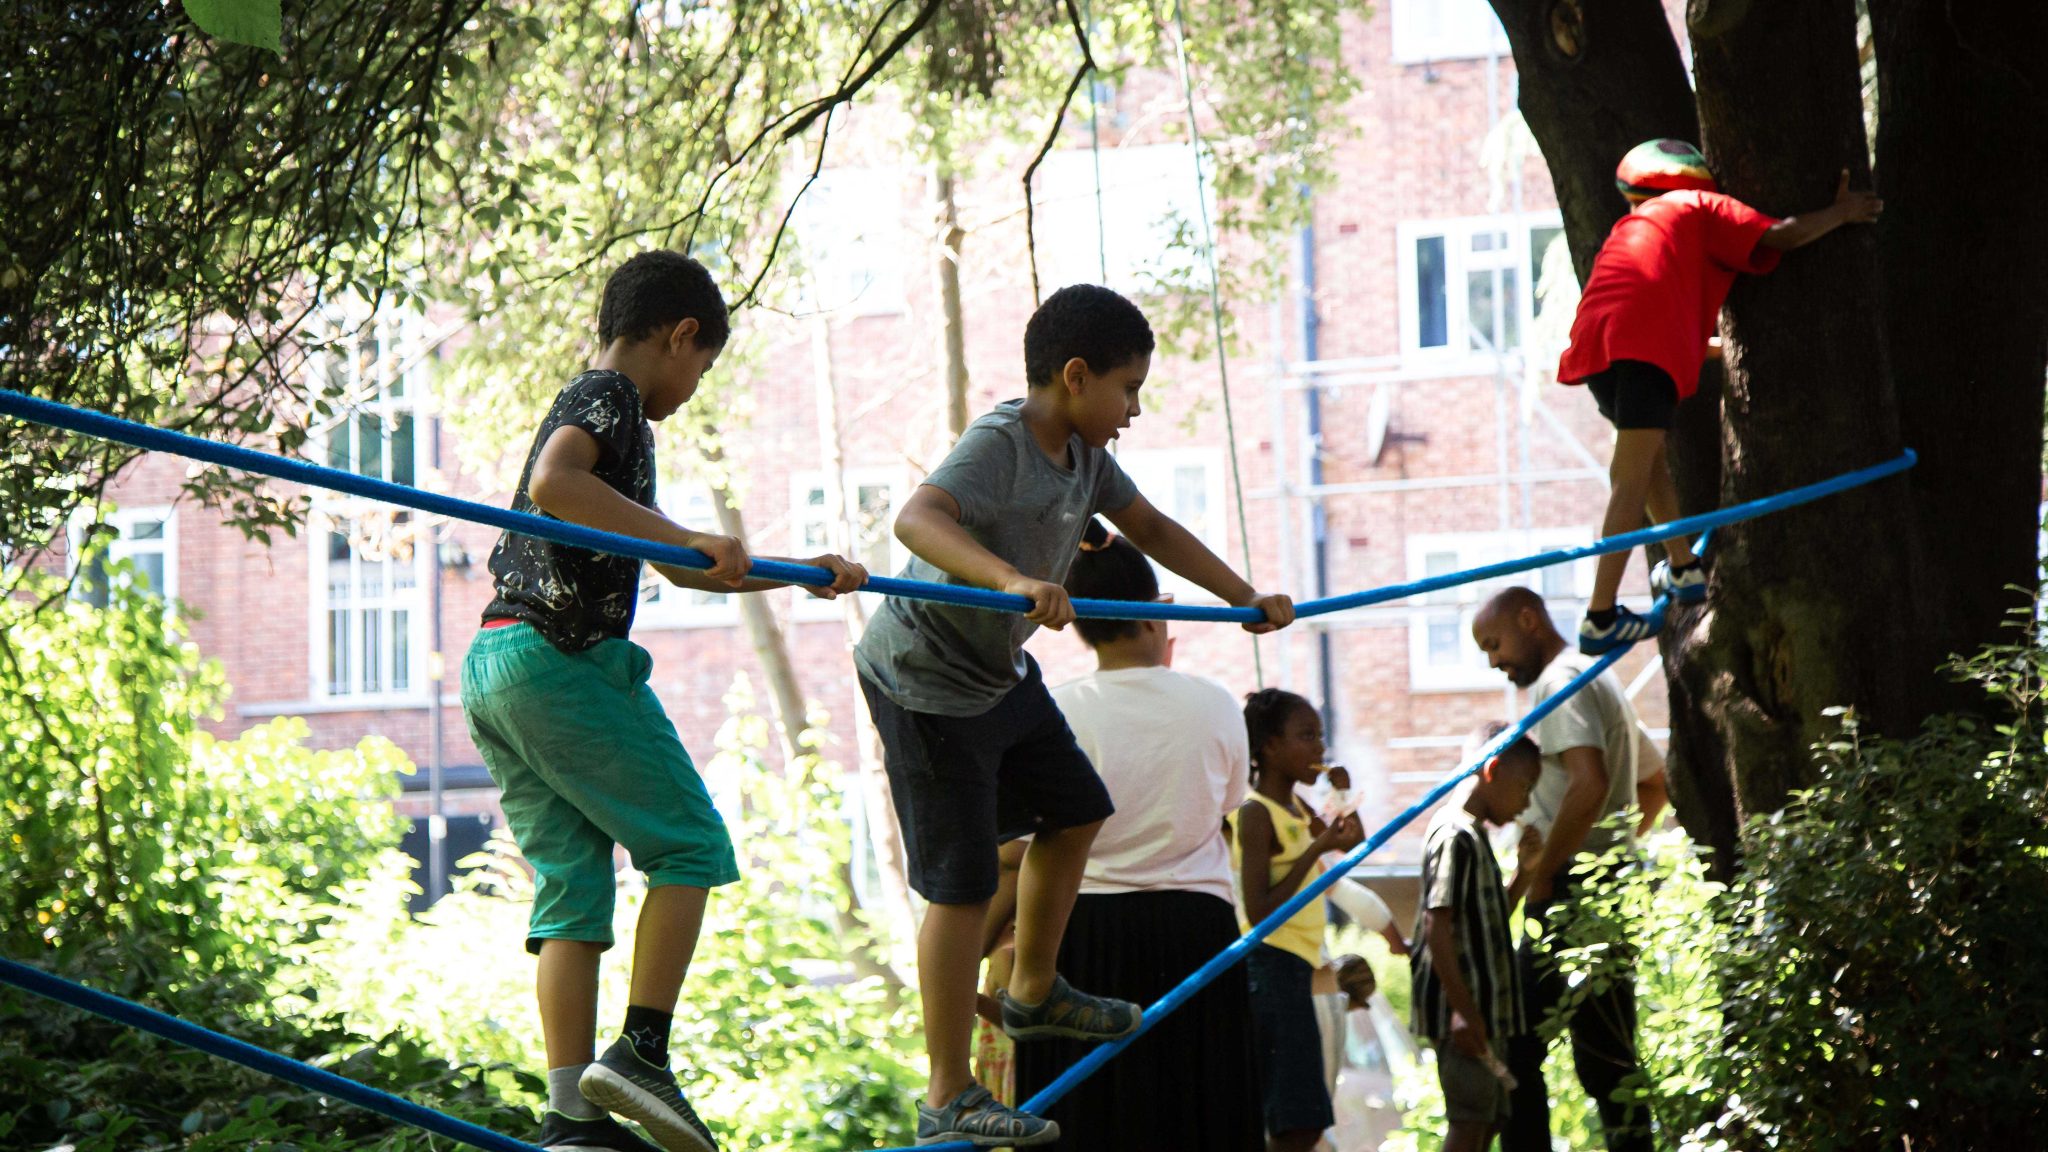 Children playing on a basic rope walk strung between two trees, under a natural canopy of thick leaves. Housing can be seen in the background.